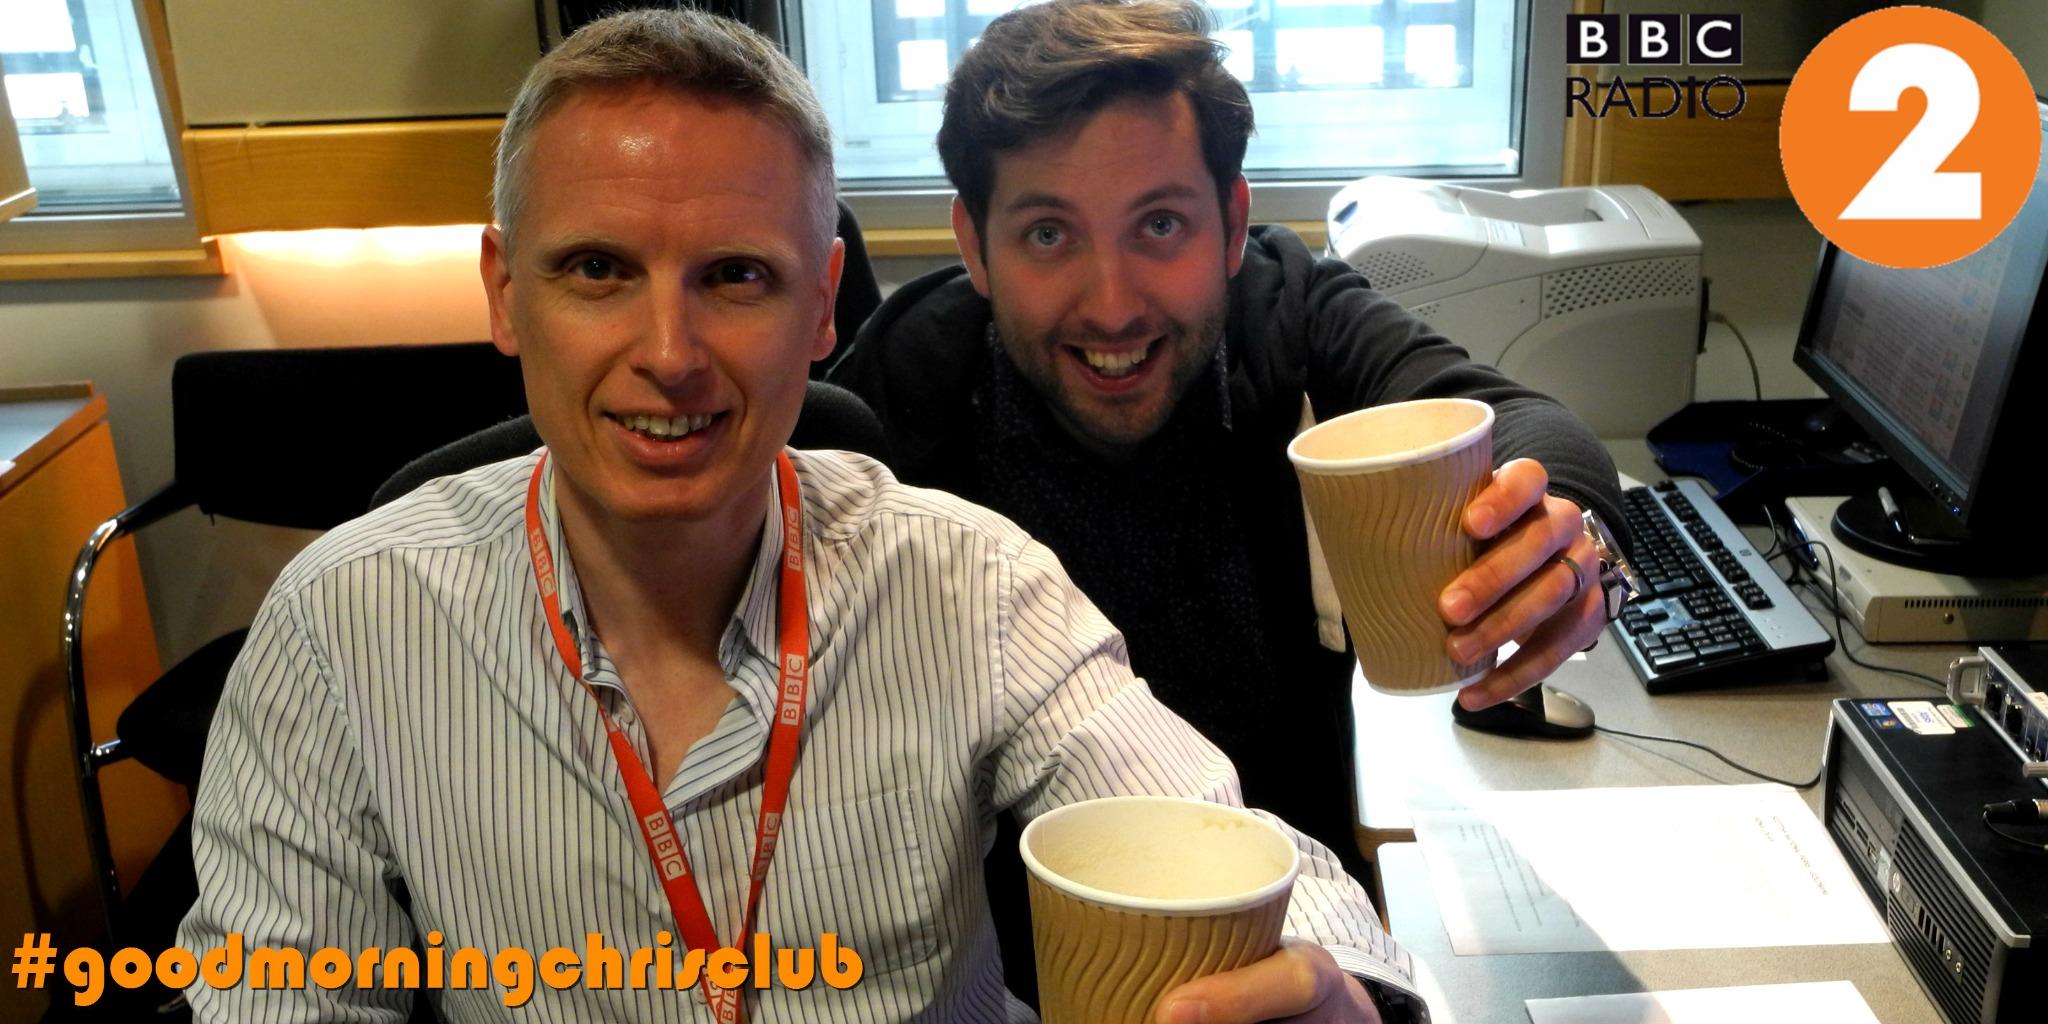 algo mensaje insalubre BBC Radio 2 on Twitter: "Welcome to Wednesday! The top Team (Golden Graham  &amp; Dr. Paul) are taking your entries into the #goodmorningchrisclub  http://t.co/ca1KkkxSiZ" / Twitter